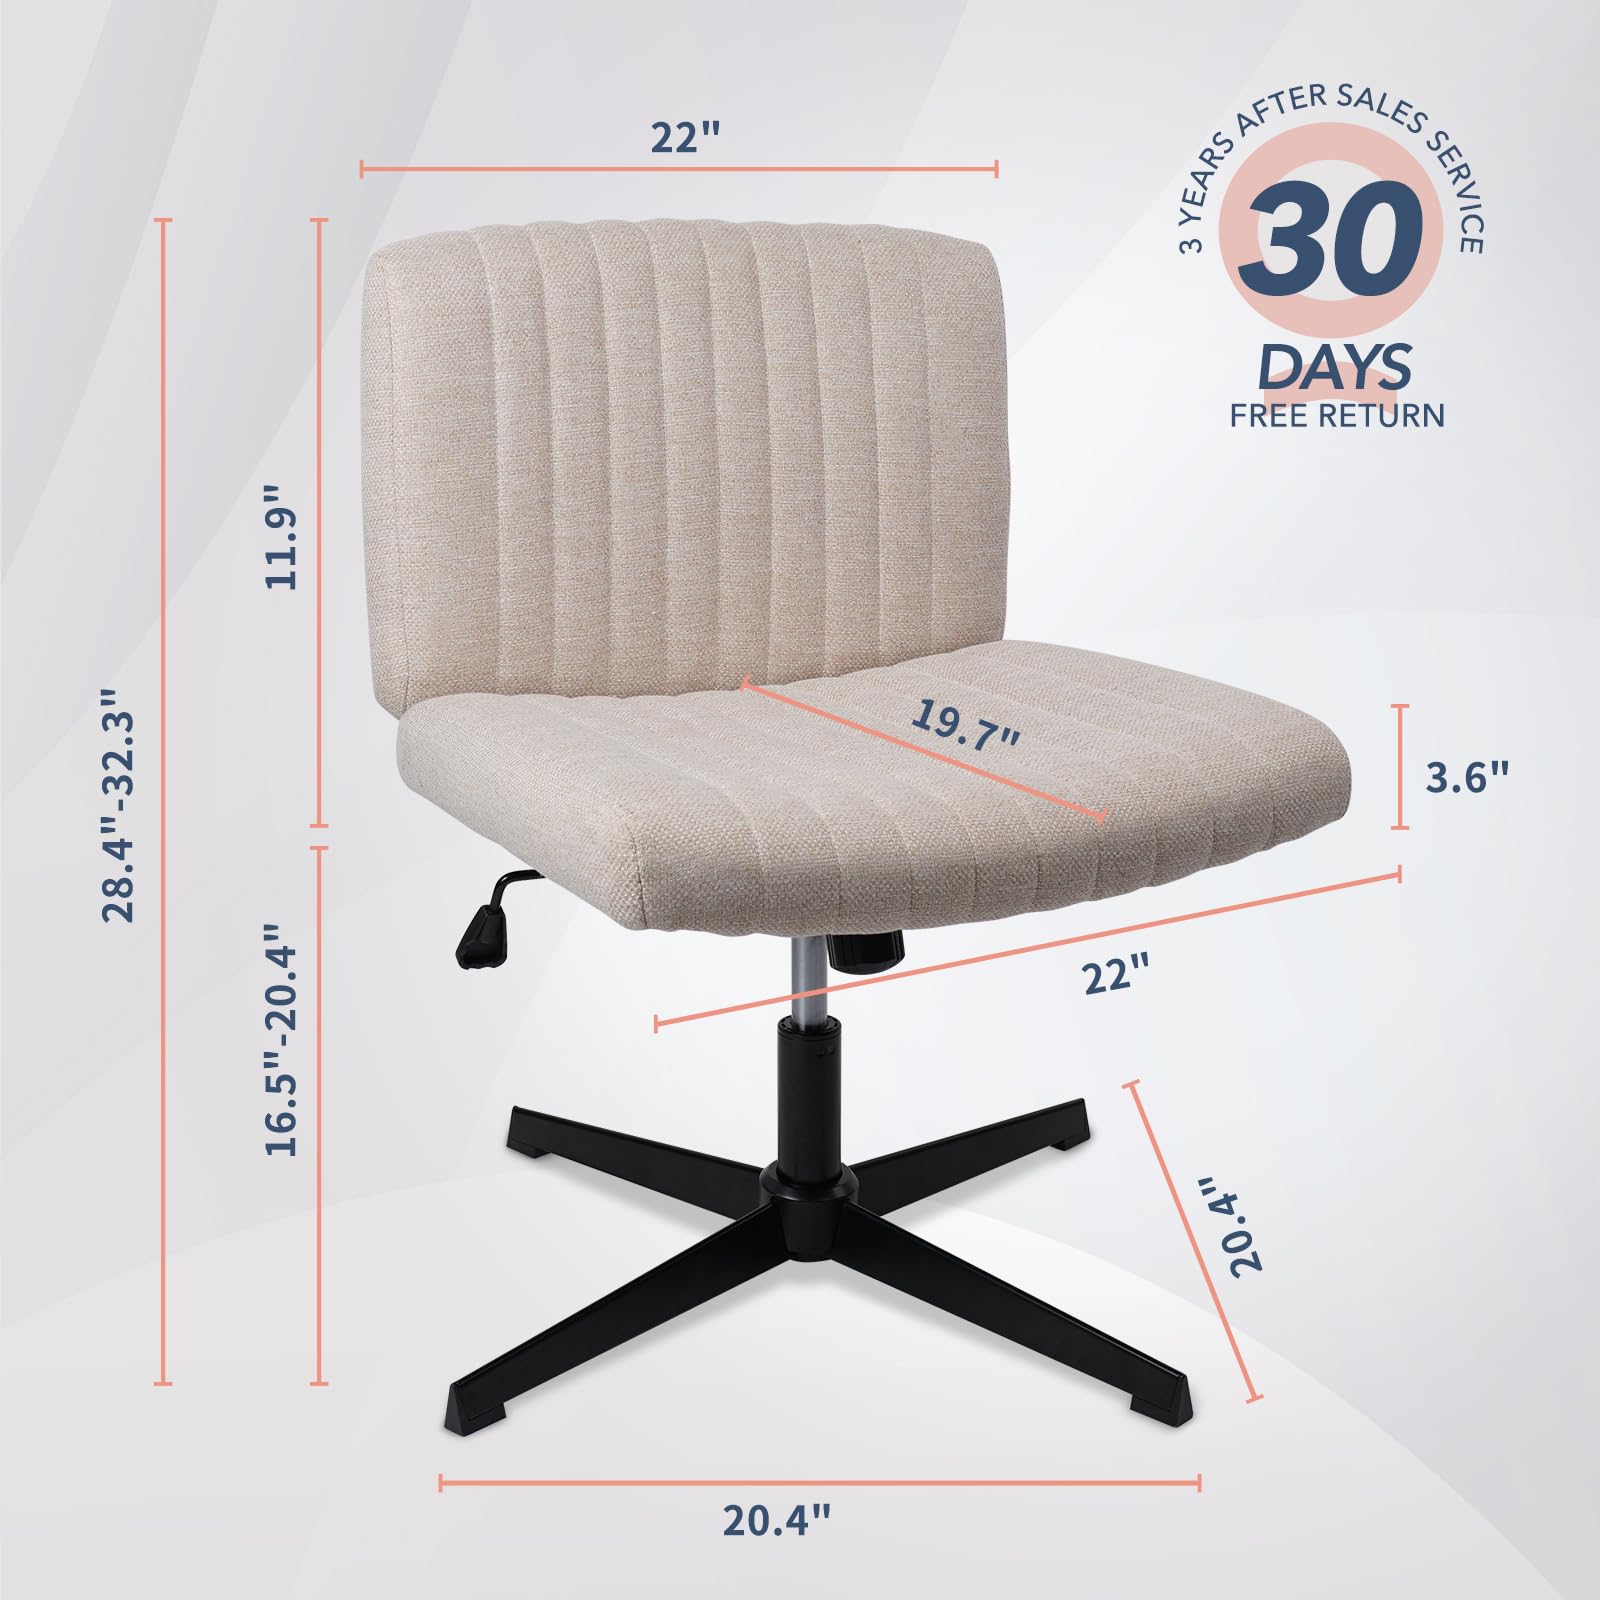 Closer Look: Seat Depth Adjustment For Ergonomic Office Chairs 